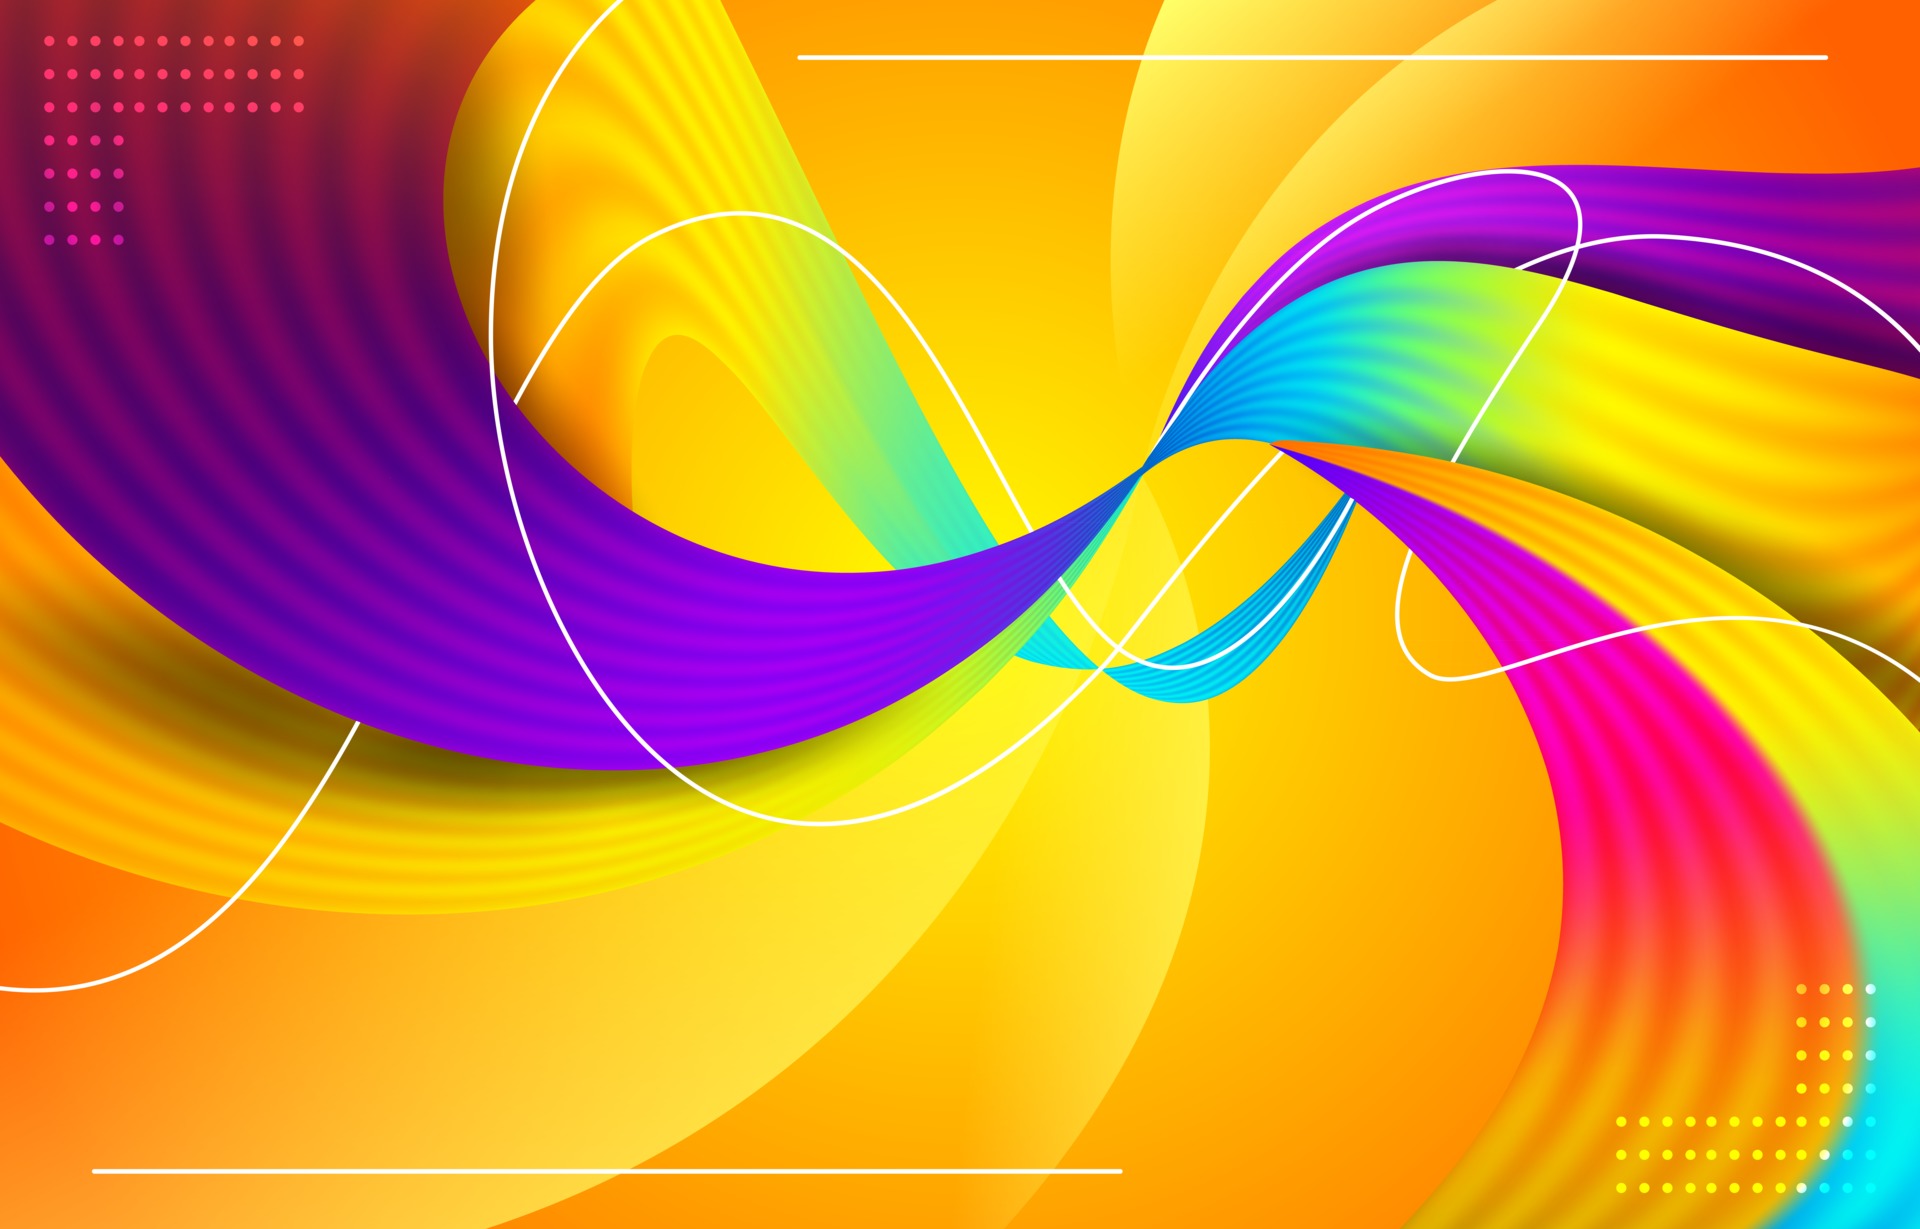 Details 100 colorful abstract background hd